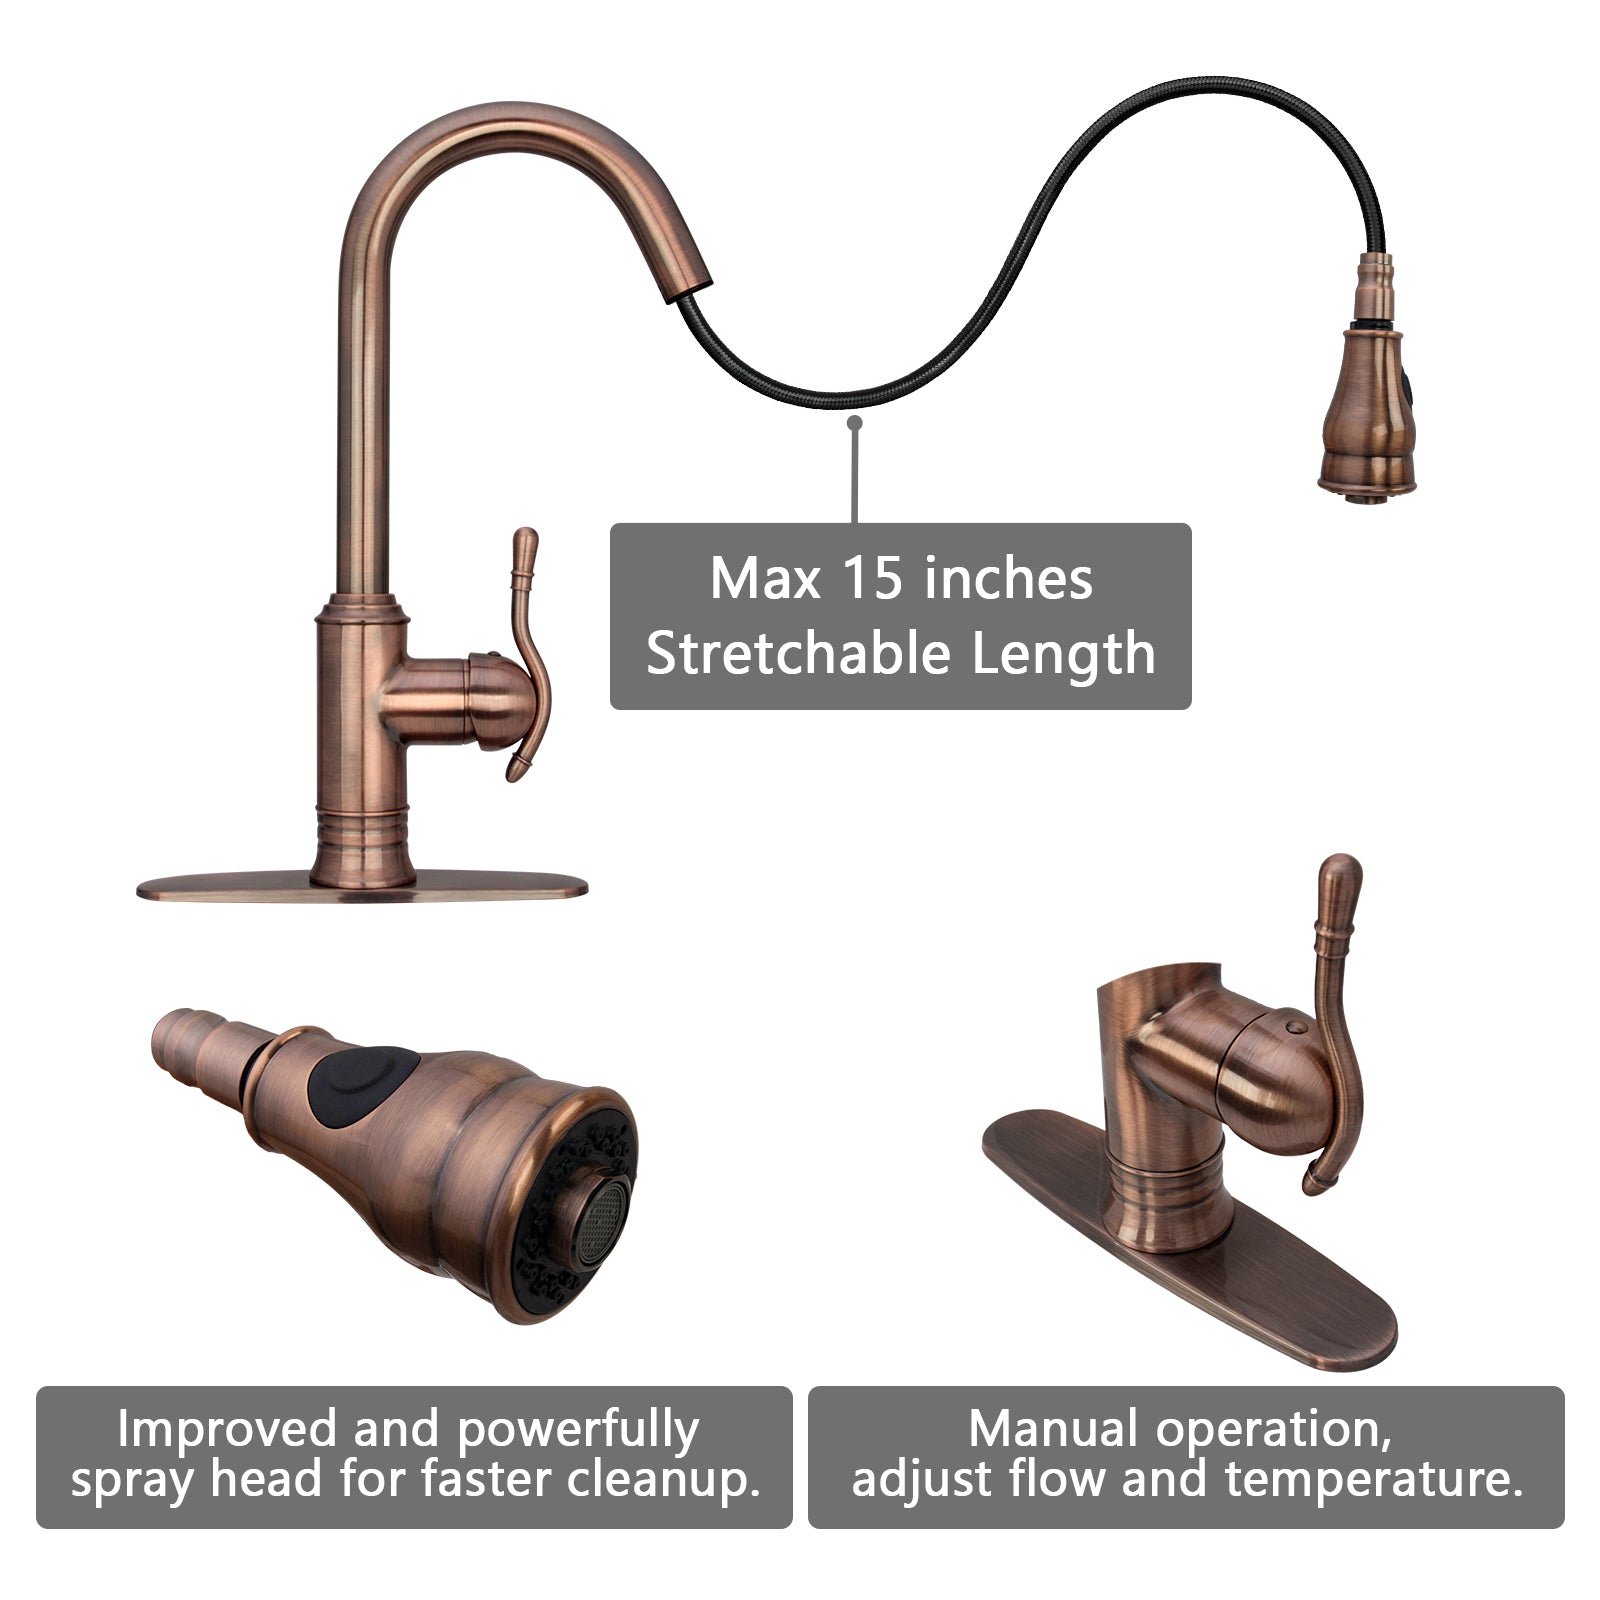 Copper Pull Out Kitchen Faucet, Single Level Solid Brass Kitchen Sink Faucets with Pull Down Sprayer - AK96415-D-AC